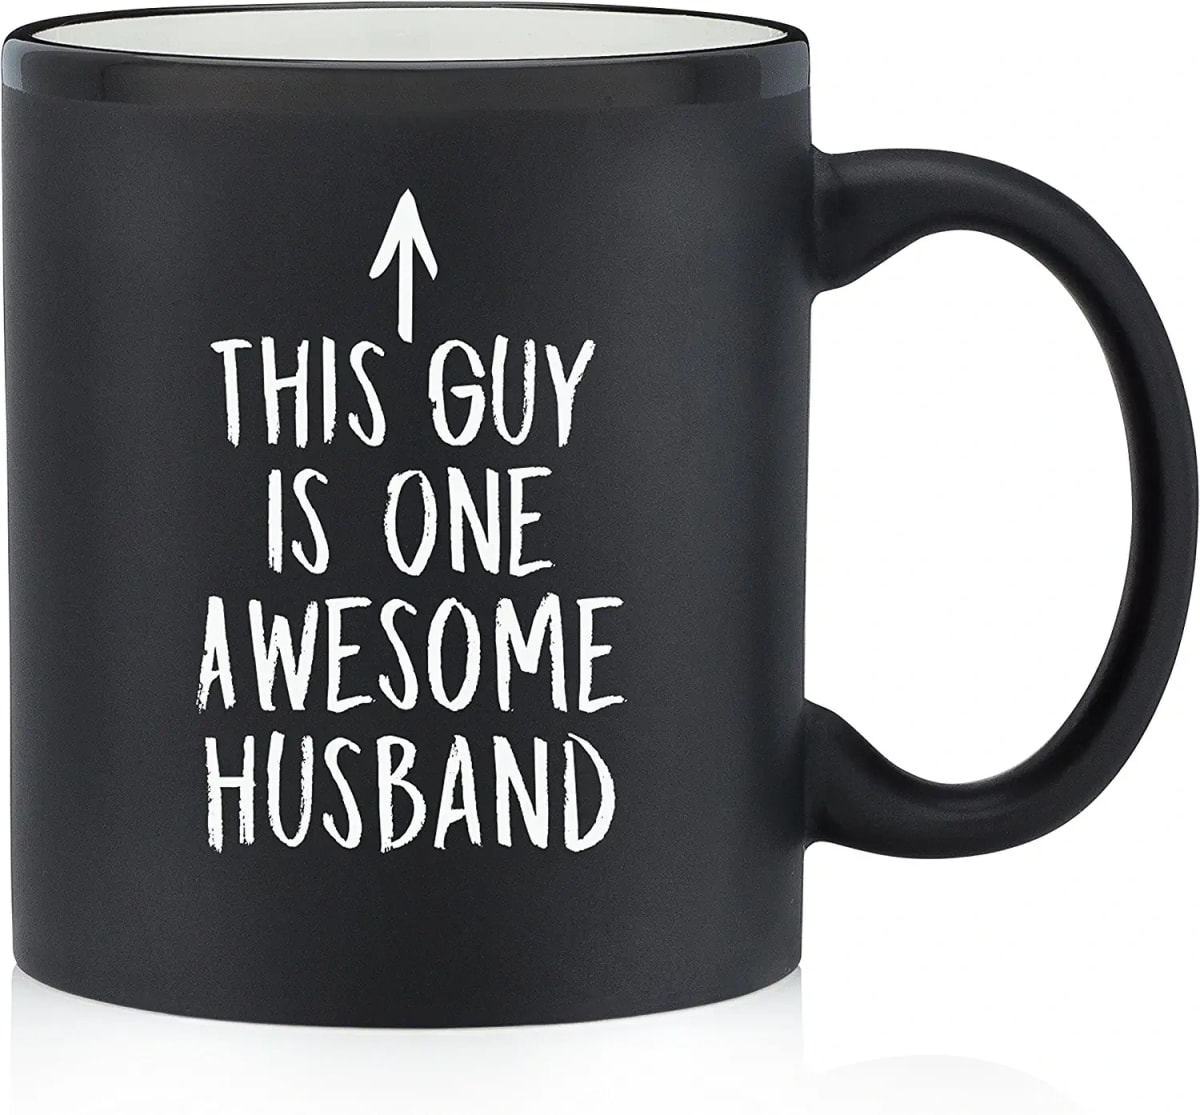 One Awesome Husband Funny Coffee Mug - Anniversary & Birthday Gifts for Men, Him - Best Husband Gifts from Wife, Her - Unique Bday Present Idea from Wifey - Fun & Cool Novelty Cup